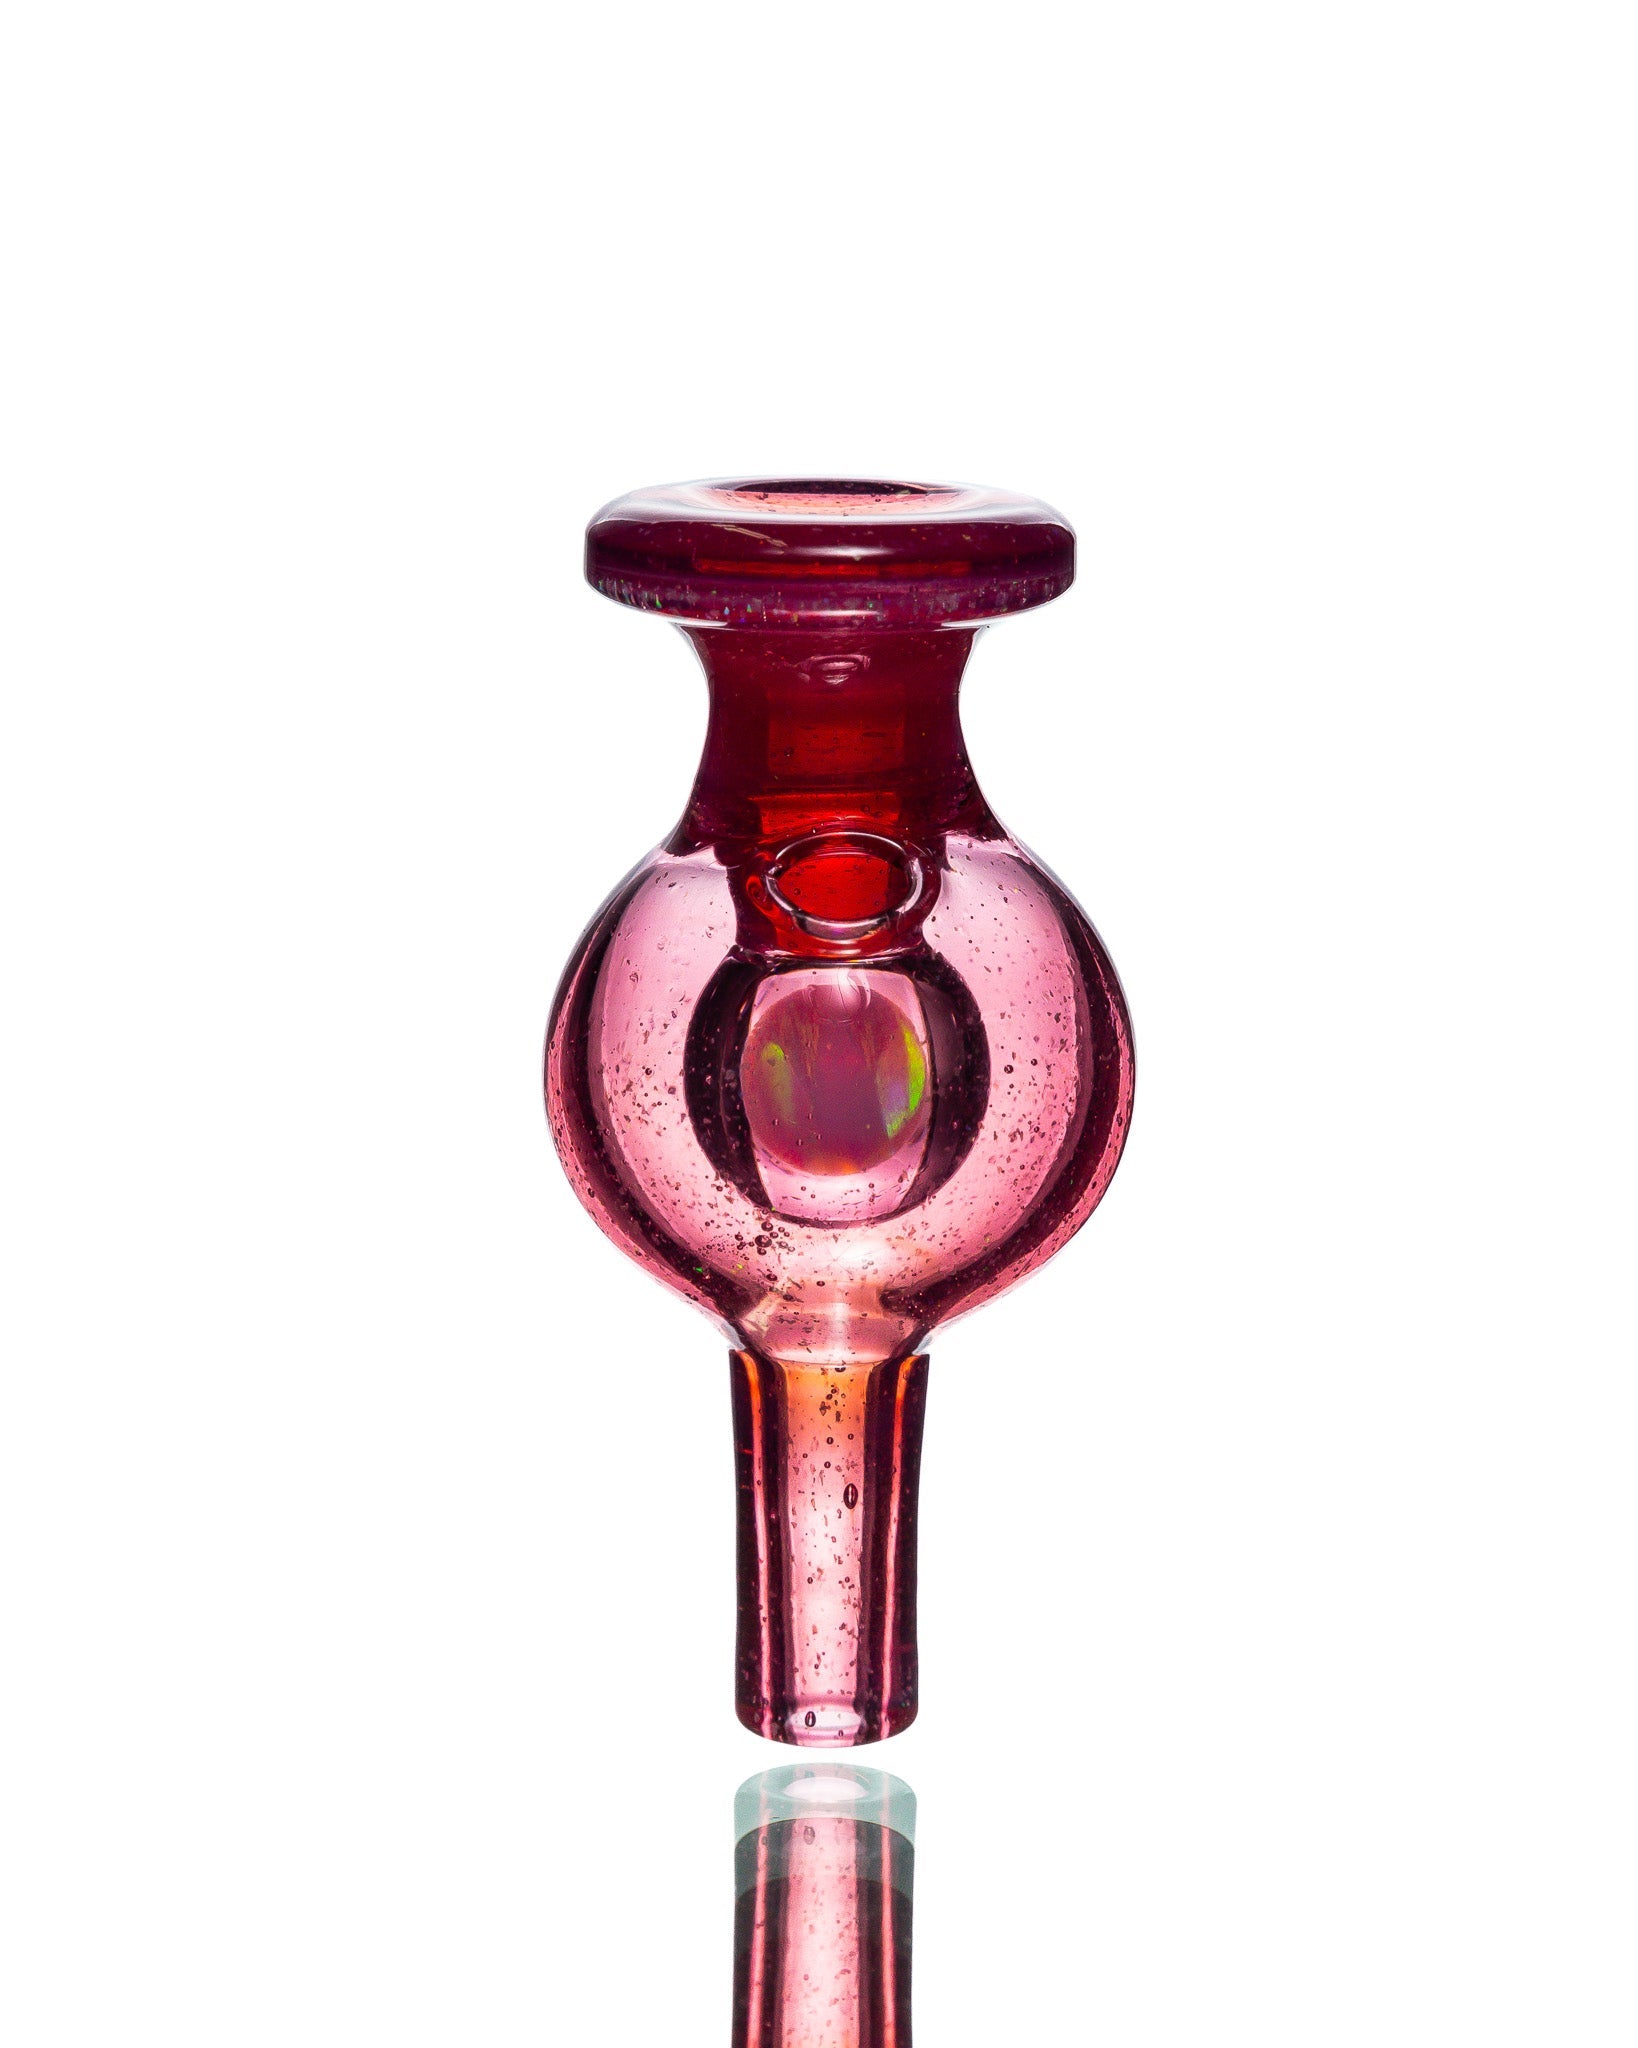 Soup Glass - "Pretty in Pink" Crushed Opal Bubble Cap